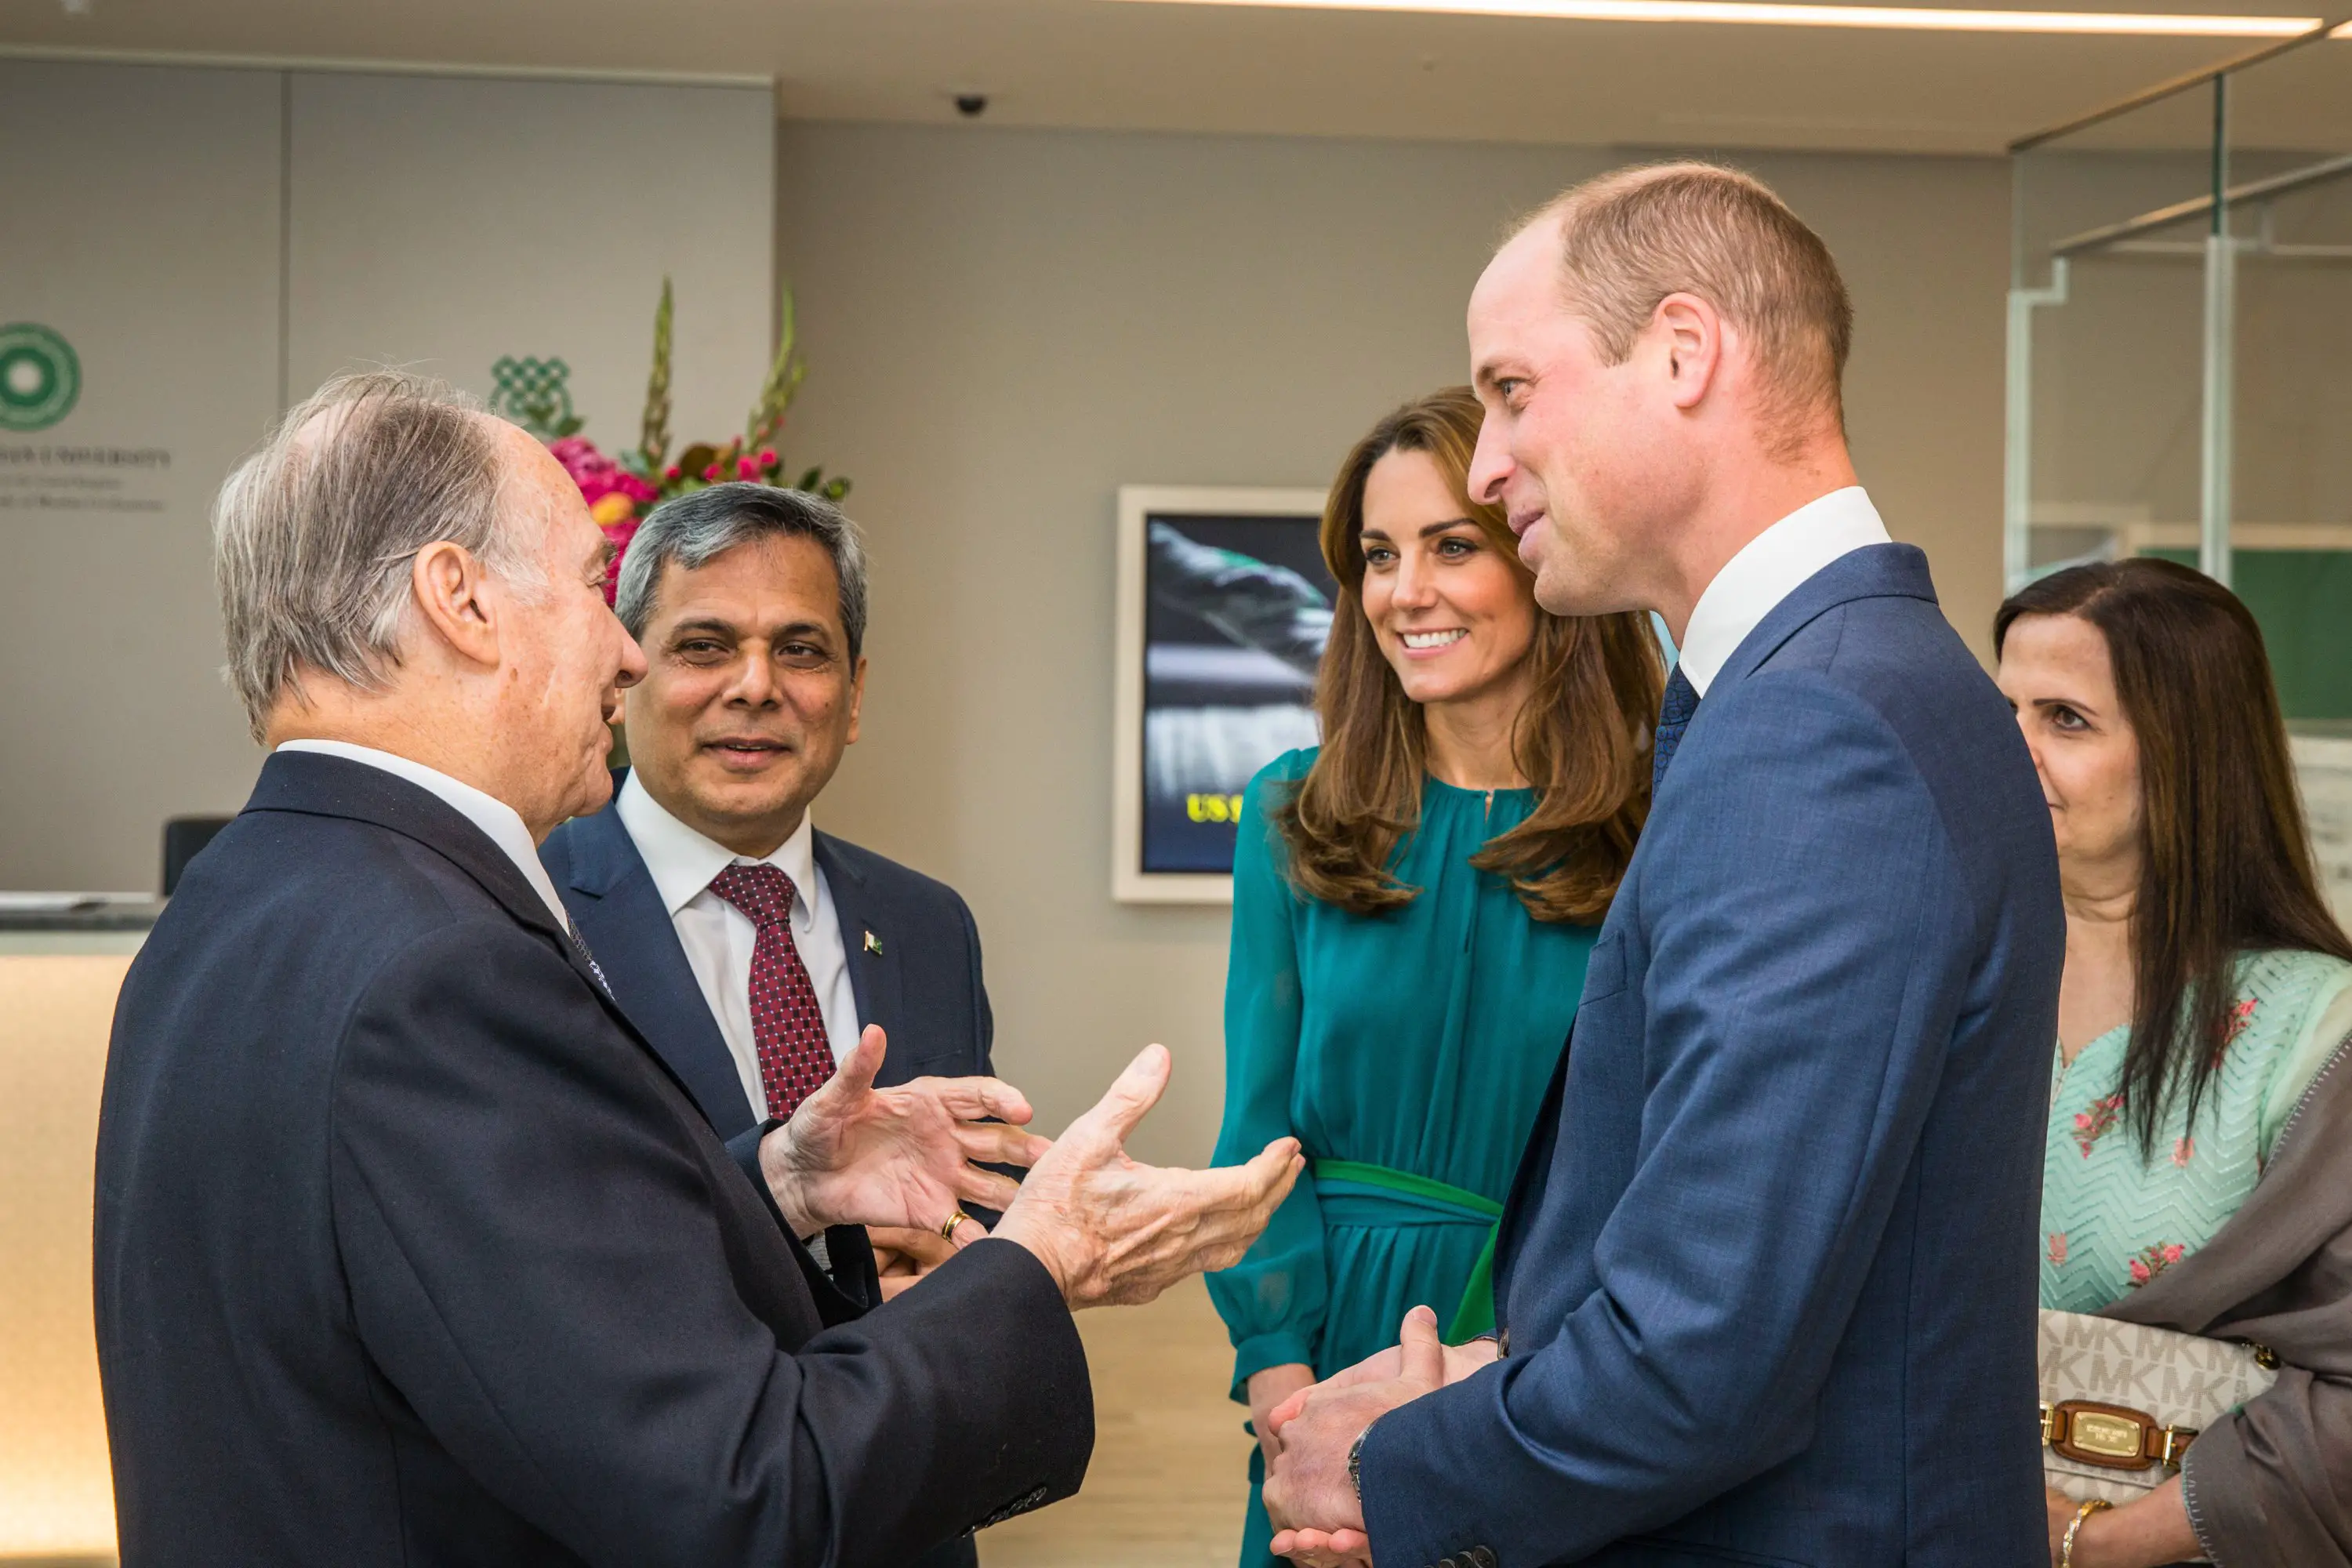 The Duke and Duchess of Cambridge attended special event at Aga Khan Center in London ahead of their Pakistan visit